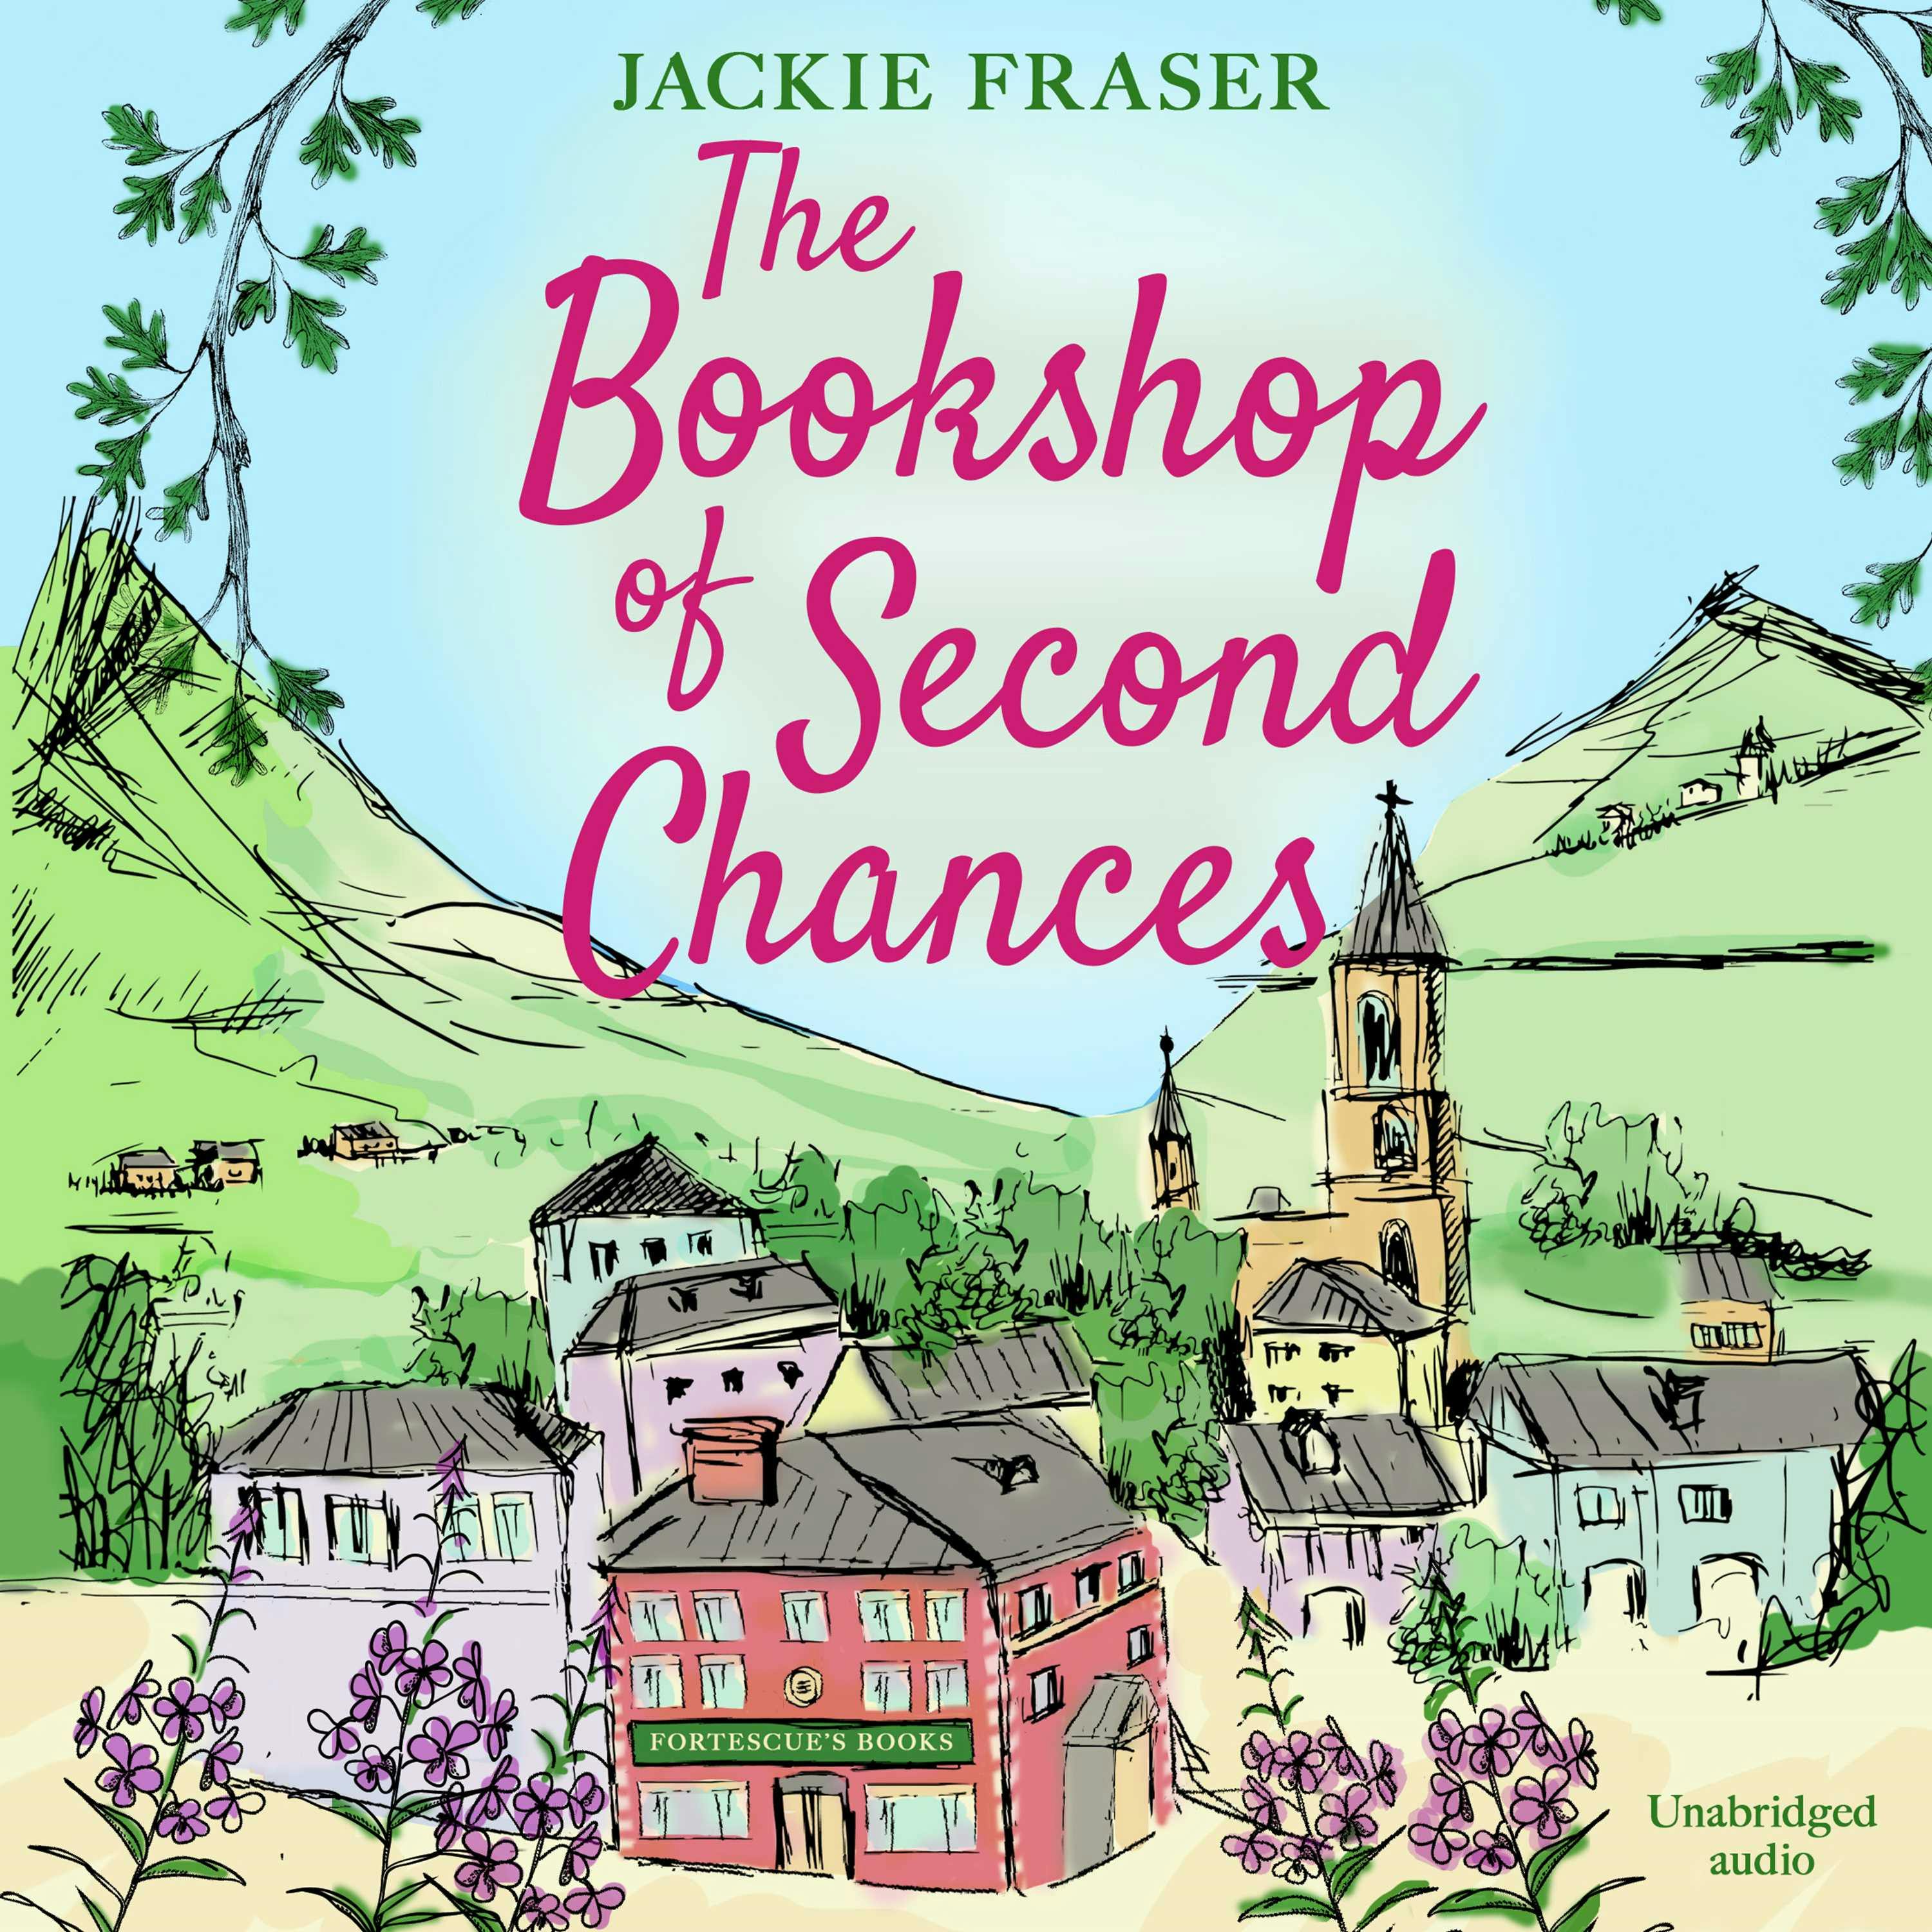 The Bookshop of Second Chances: The most uplifting story of fresh starts and new beginnings you'll read this year! - Jackie Fraser